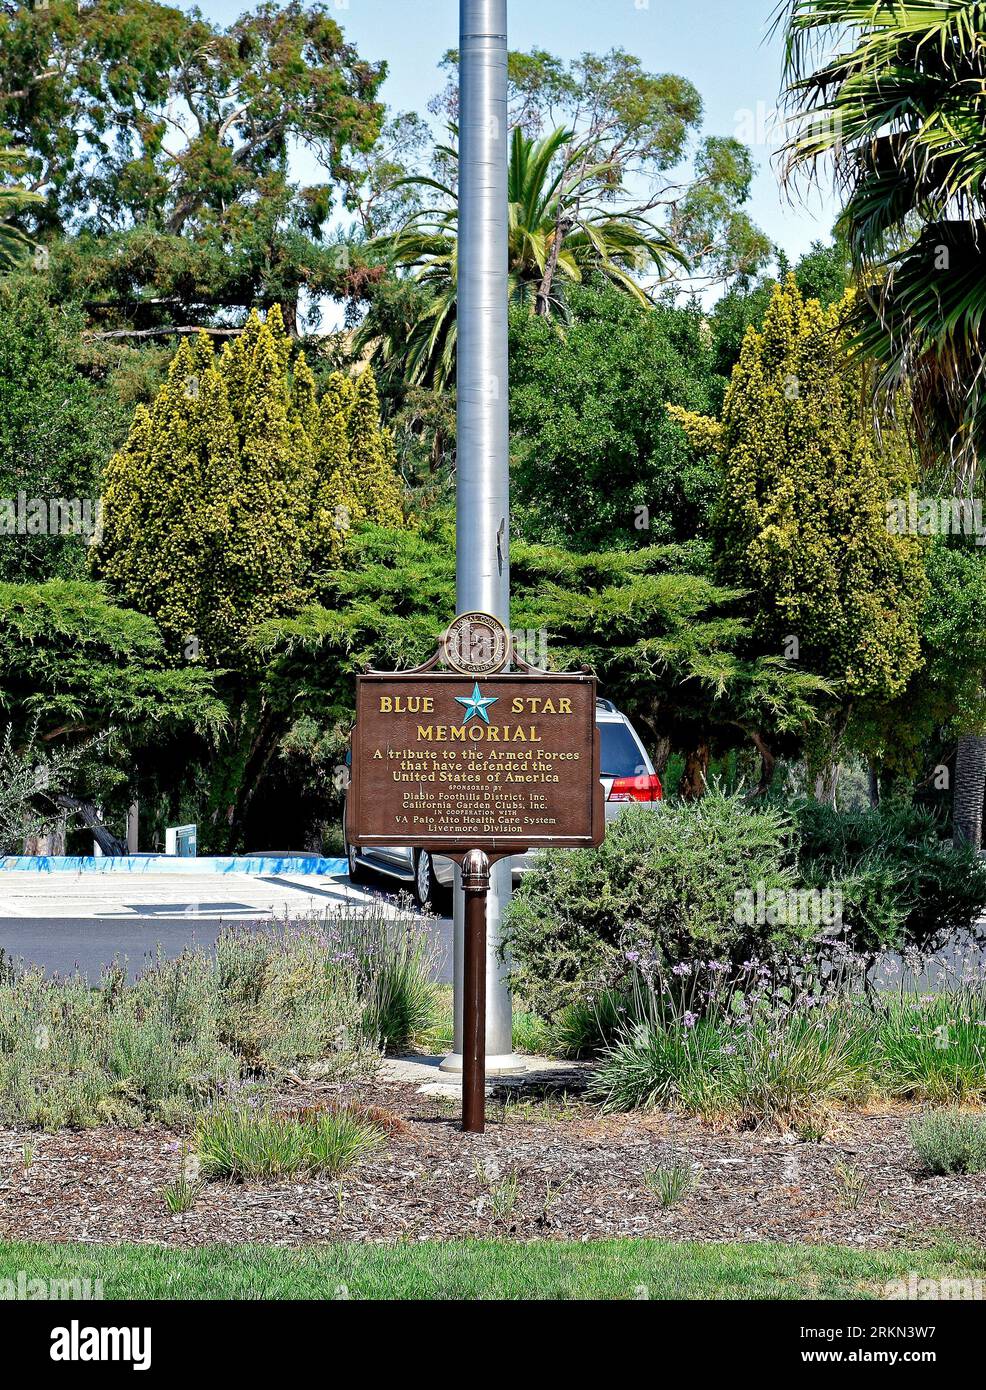 Blue Star Memorial plaque tribute to the Armed Forces, sponsored by Diablo Foothills District  and the California Garden Clubs in front of the Veterans Administration's Hospital  in Livermore, California Stock Photo